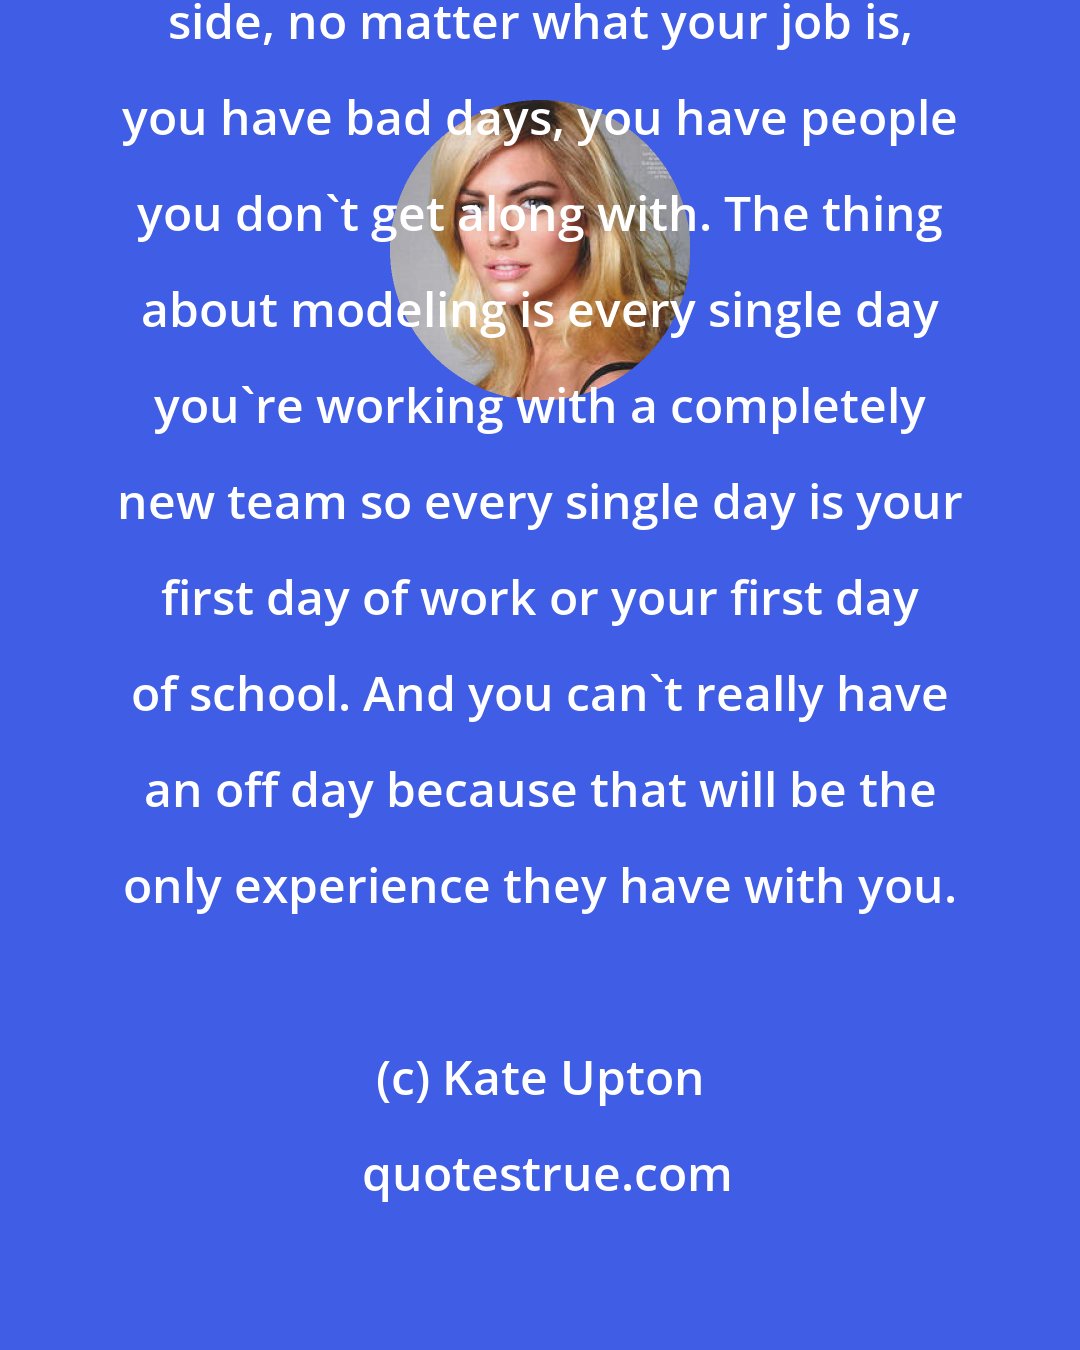 Kate Upton: I think that everybody has hard work side, no matter what your job is, you have bad days, you have people you don't get along with. The thing about modeling is every single day you're working with a completely new team so every single day is your first day of work or your first day of school. And you can't really have an off day because that will be the only experience they have with you.